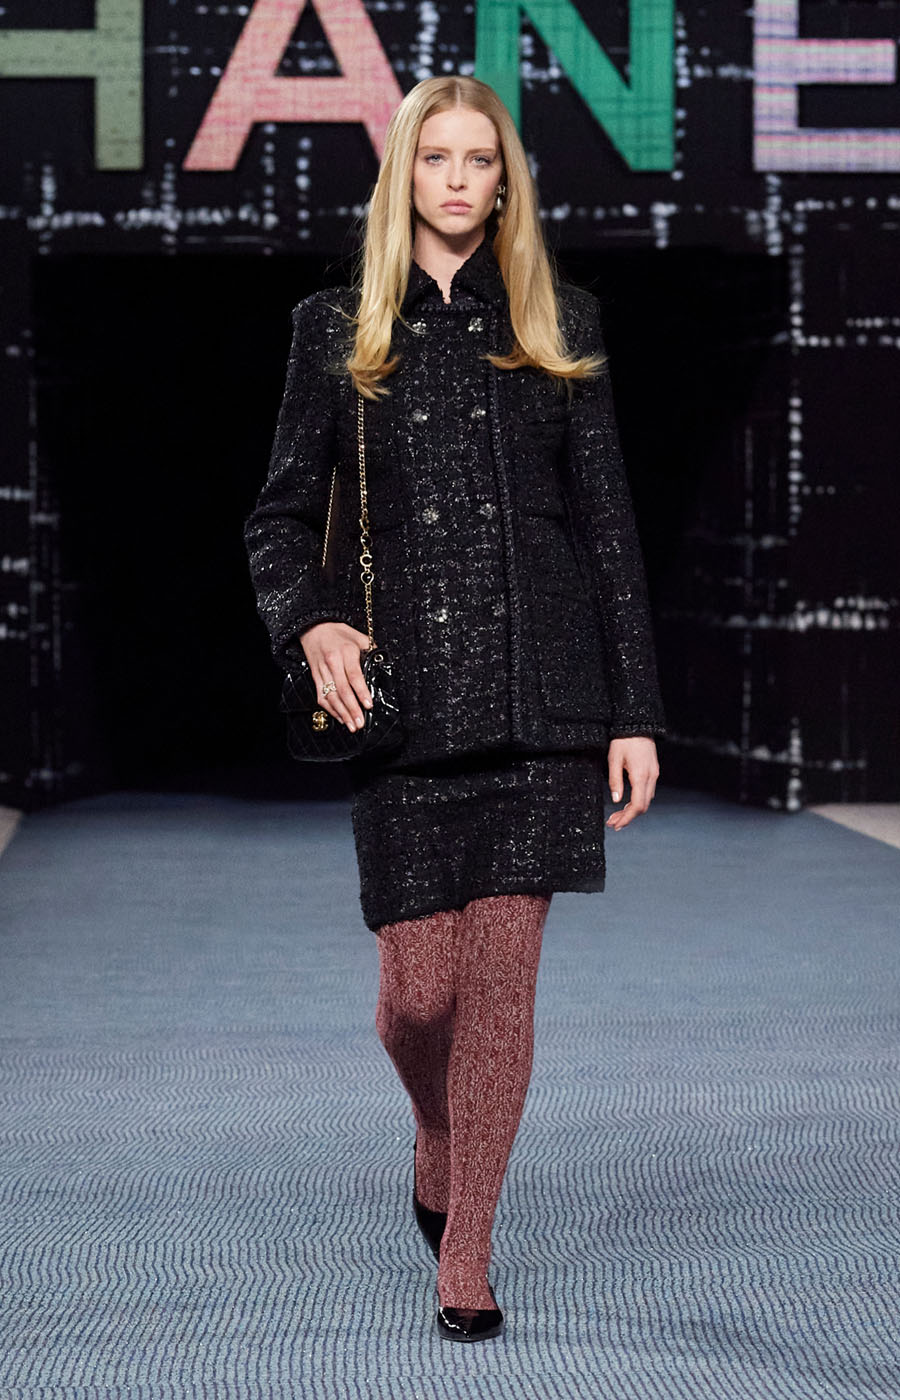 Chanel Fall/Winter 2022/23 collection a celebration of tweed